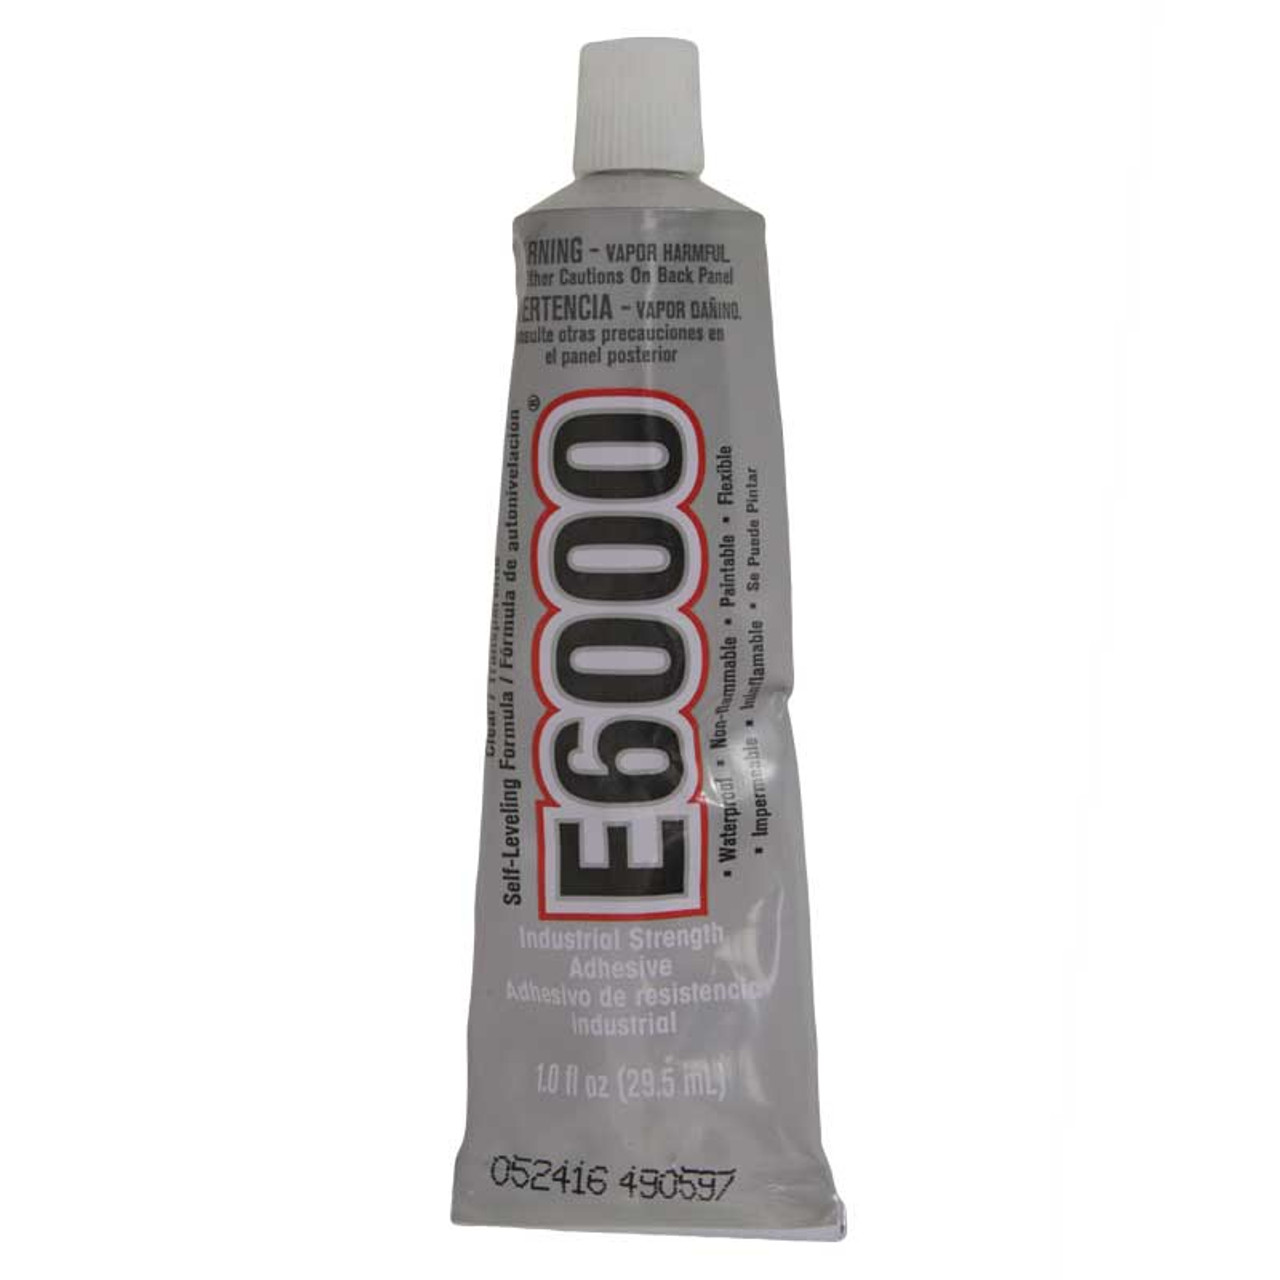 E6000 Adhesive Glue 3.7 oz. - Pack of 1: Wire Jewelry